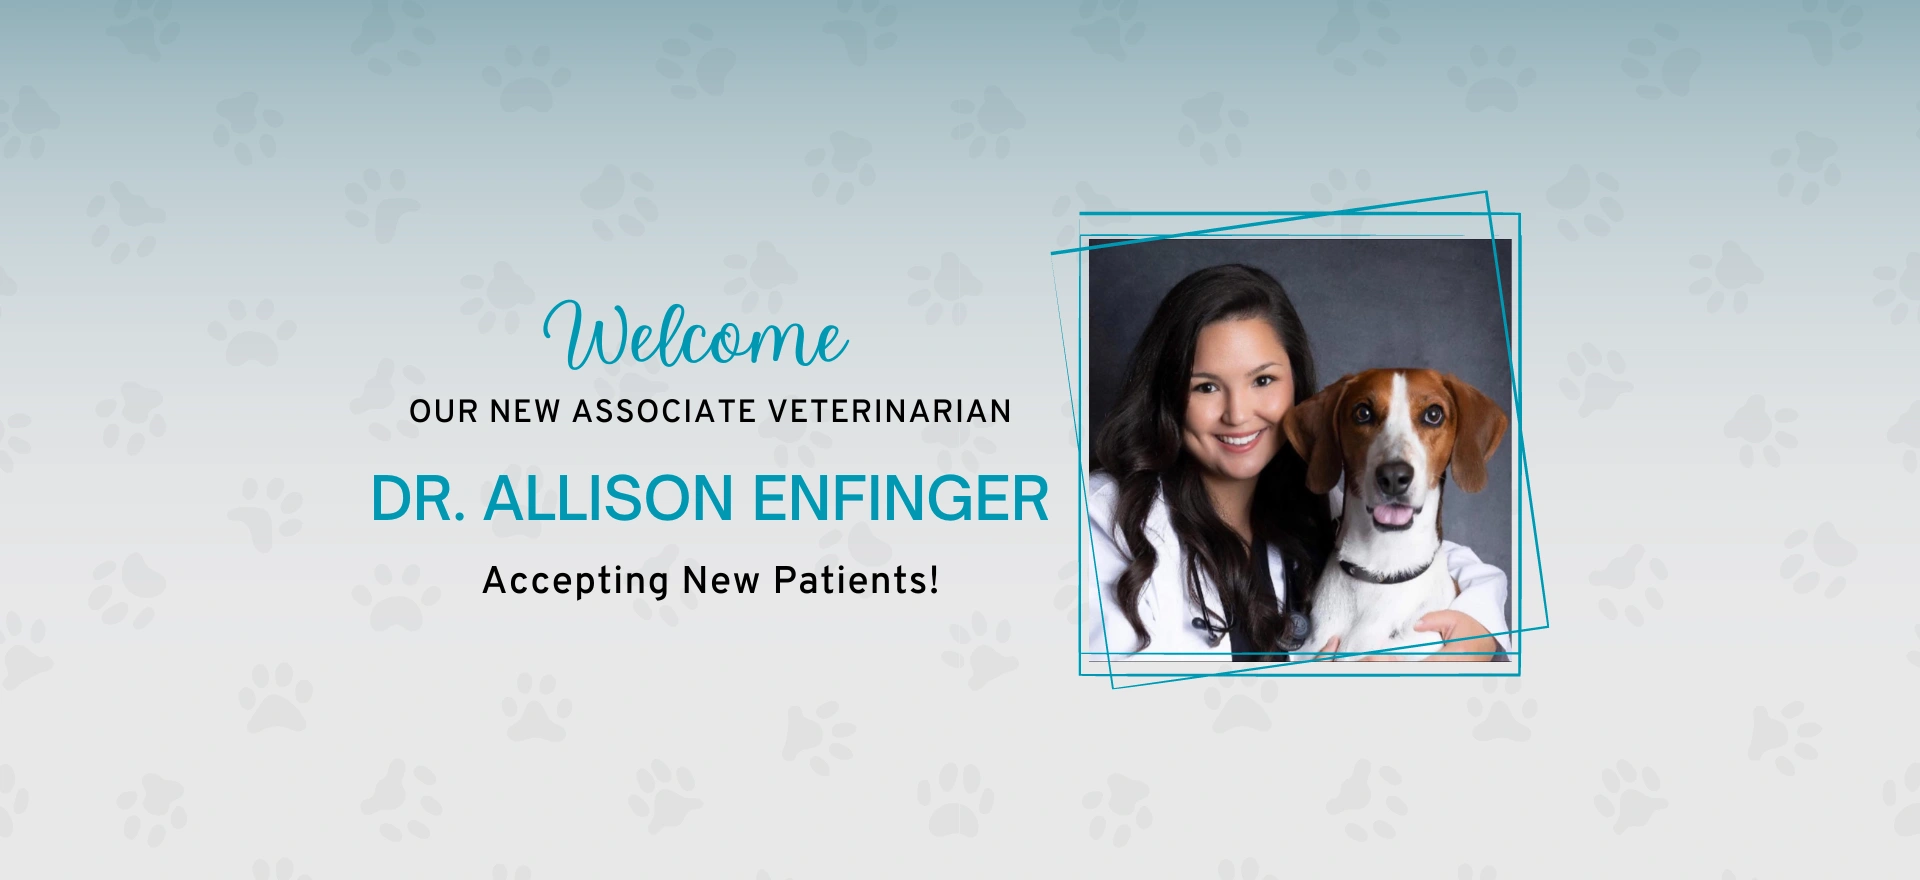 Welcome our new associate veterinarian Dr. Allison Enfinger. Accepting new patients!